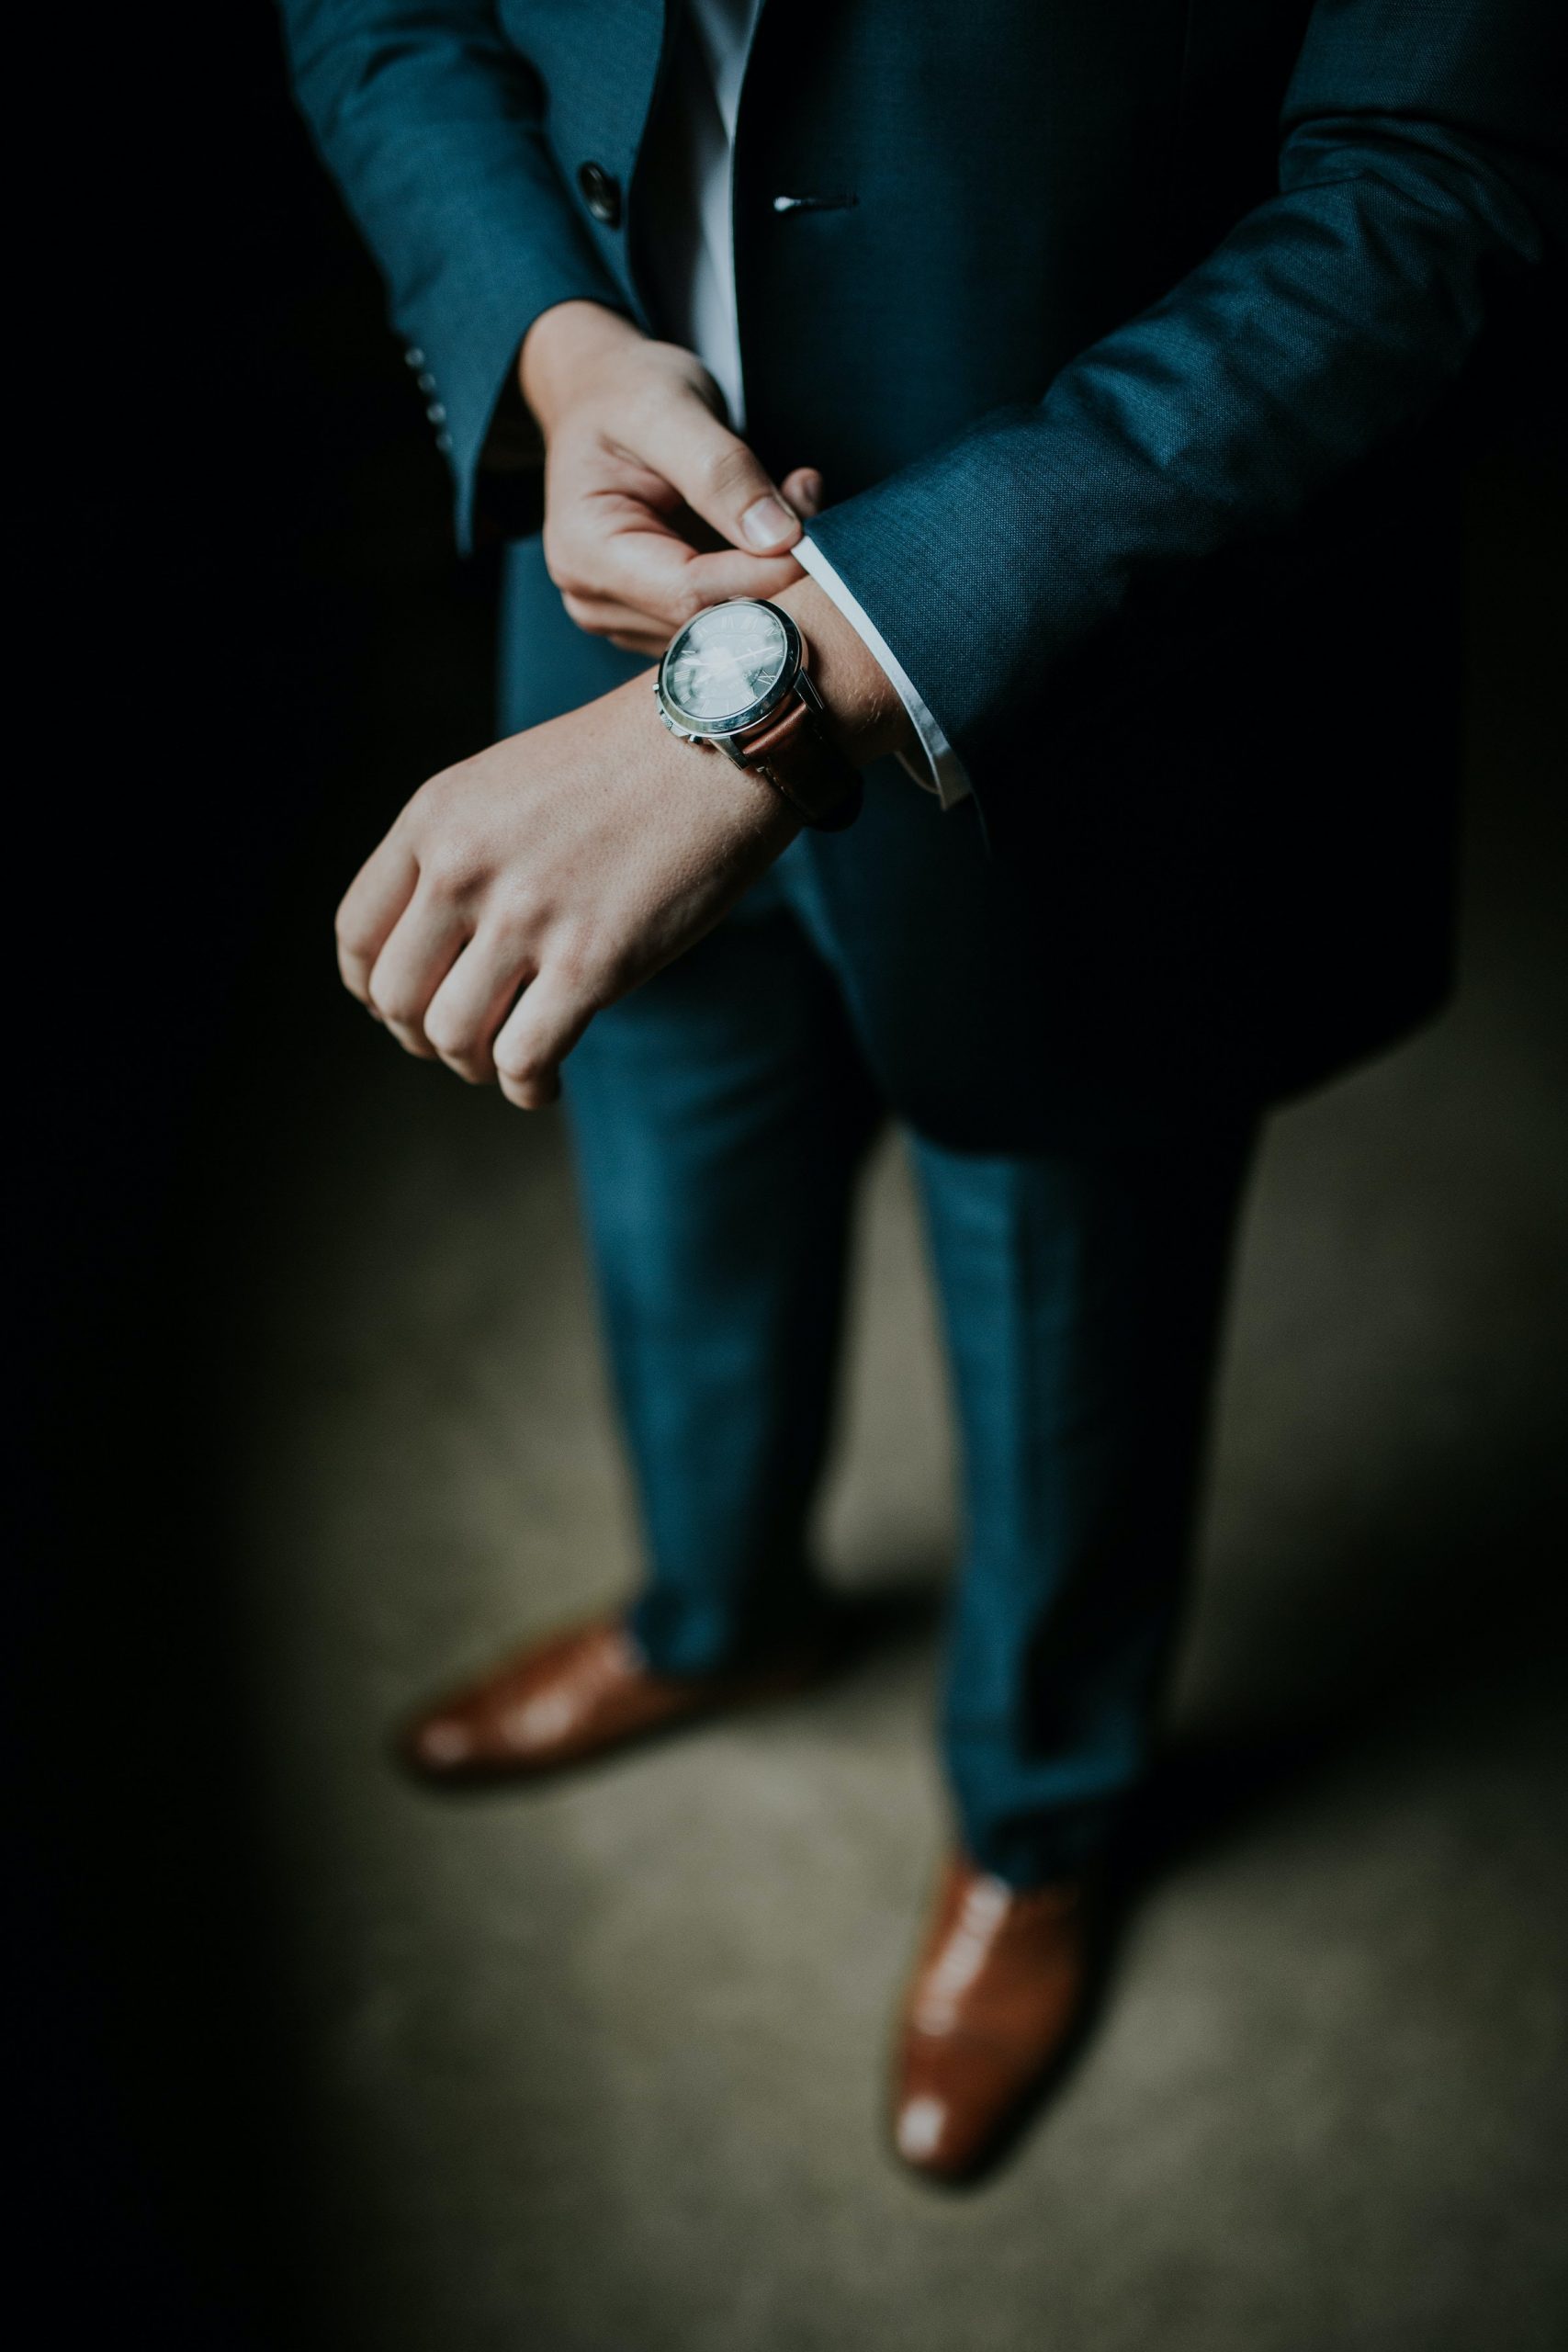 Man in suit with a watch